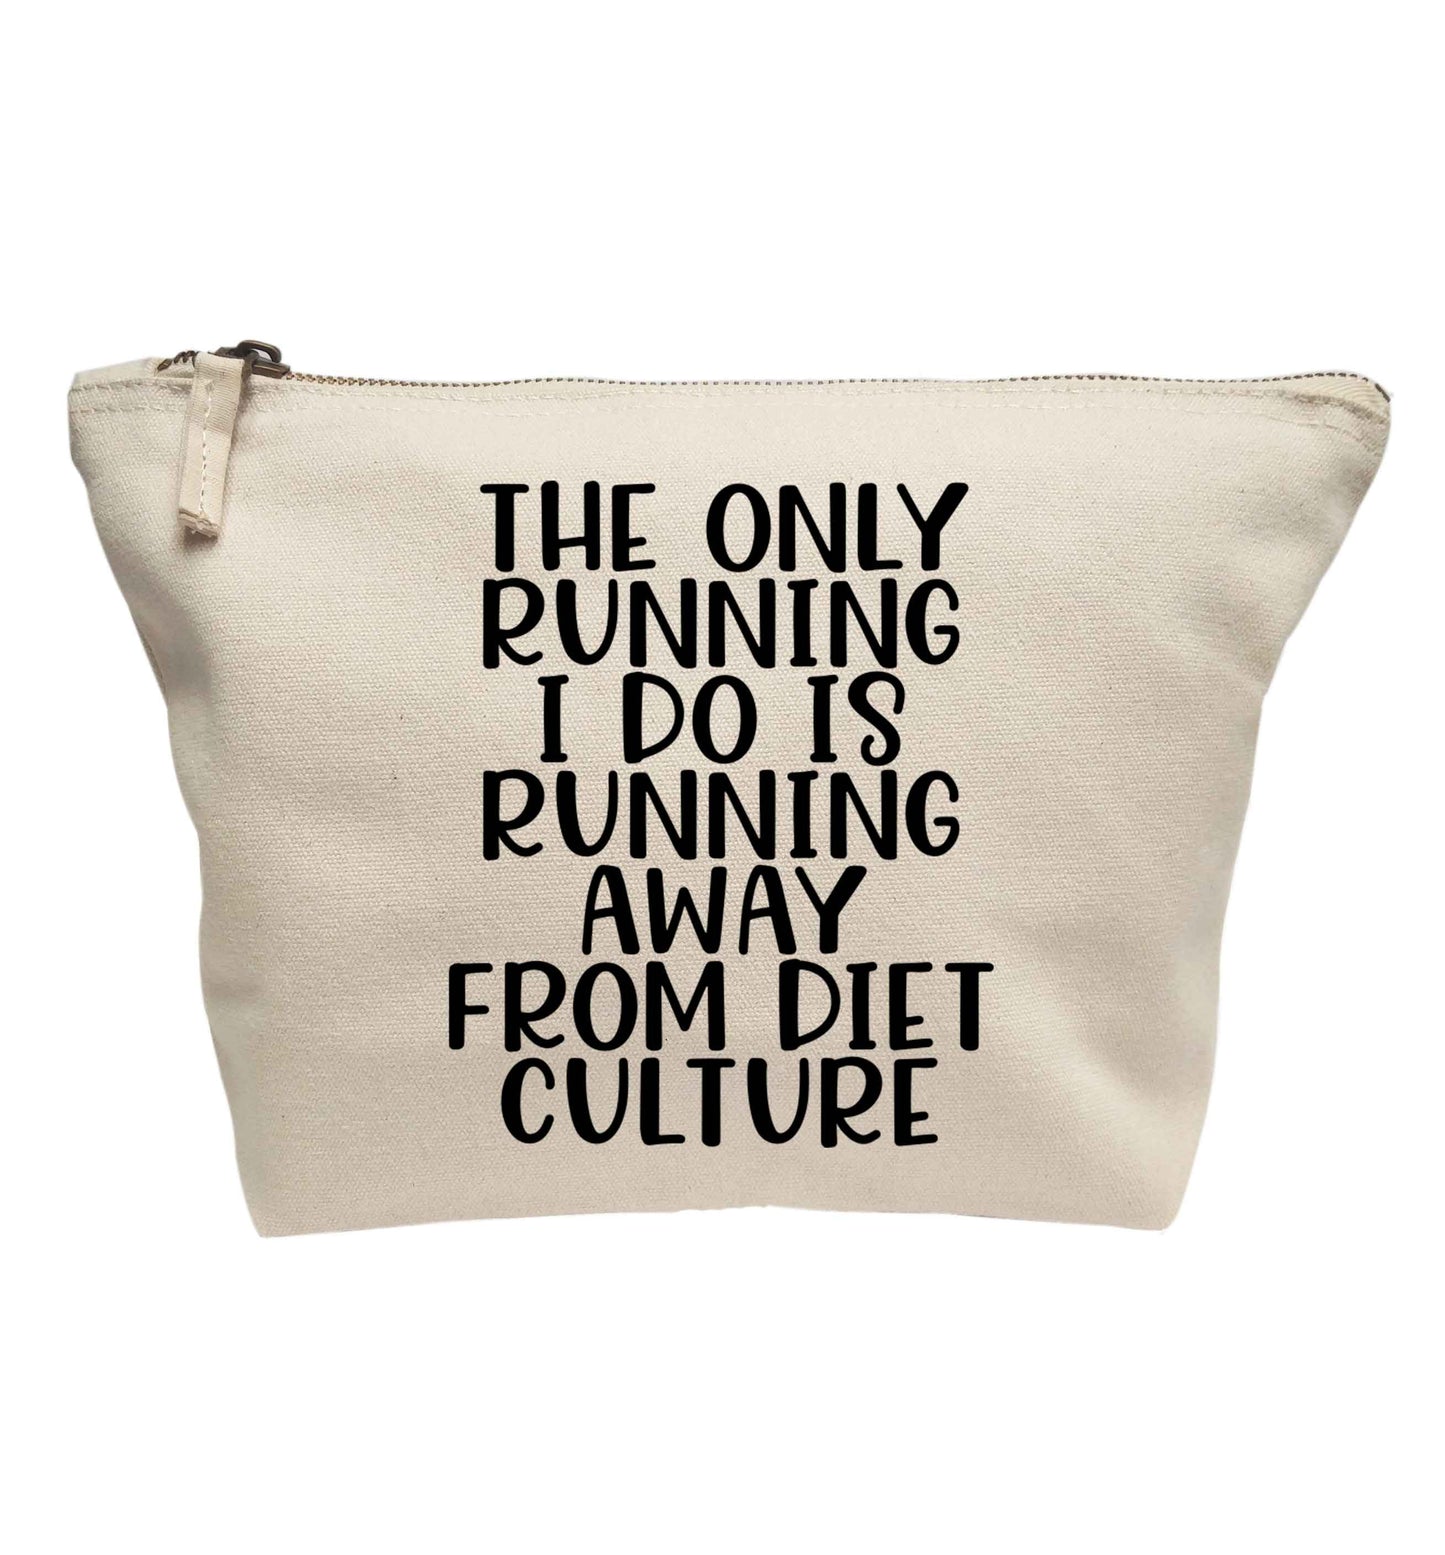 The only running I do is running away from diet culture | Makeup / wash bag